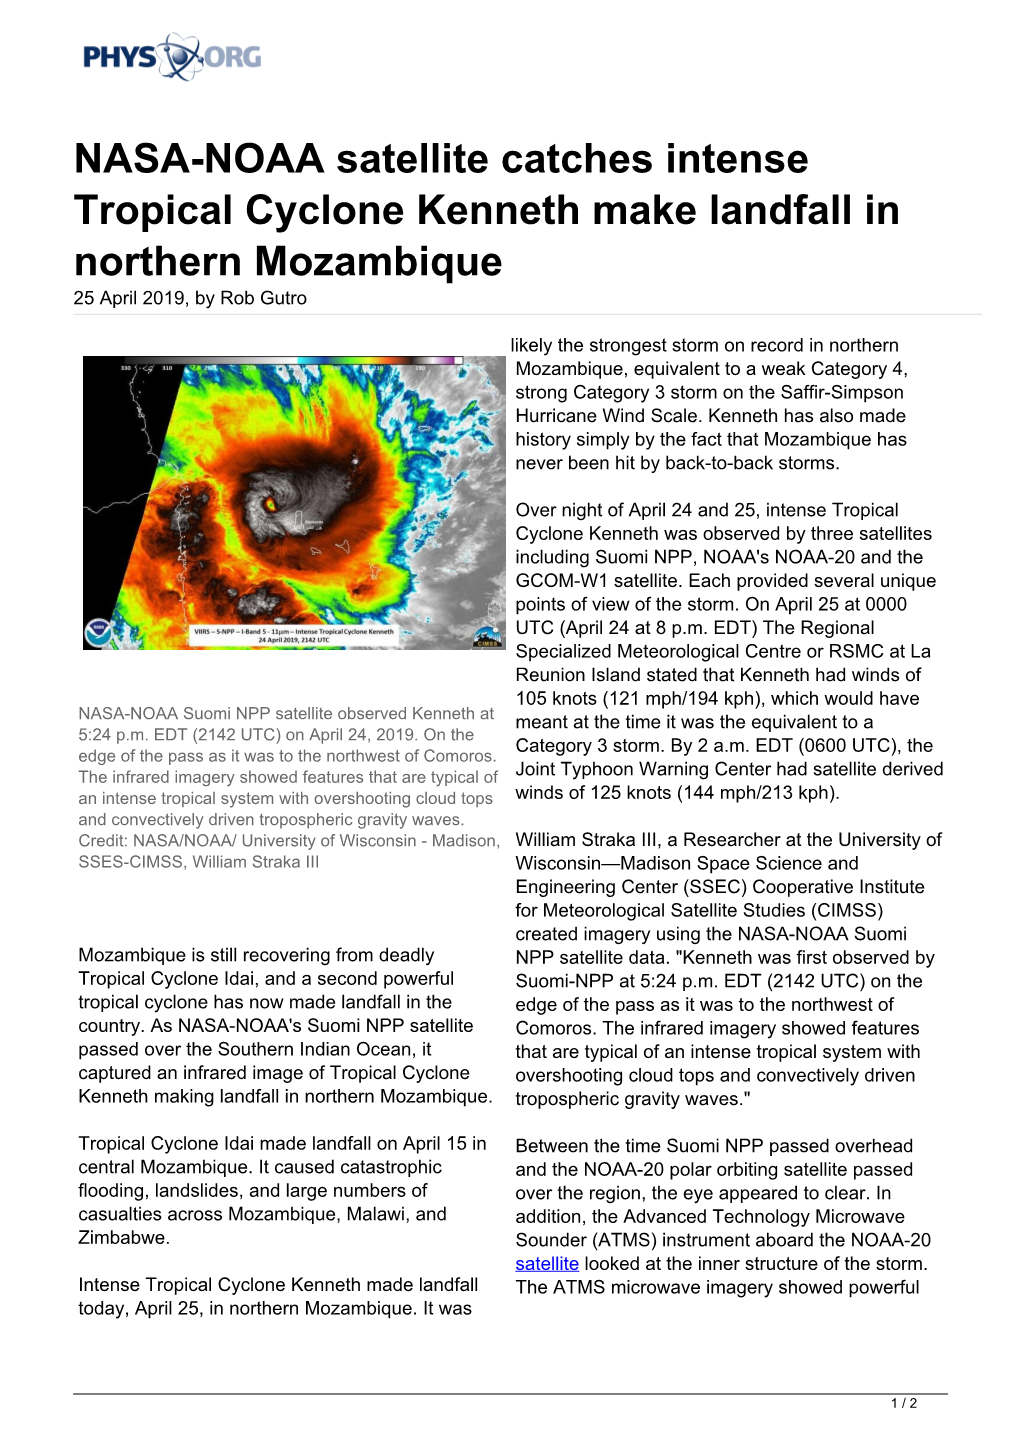 NASA-NOAA Satellite Catches Intense Tropical Cyclone Kenneth Make Landfall in Northern Mozambique 25 April 2019, by Rob Gutro